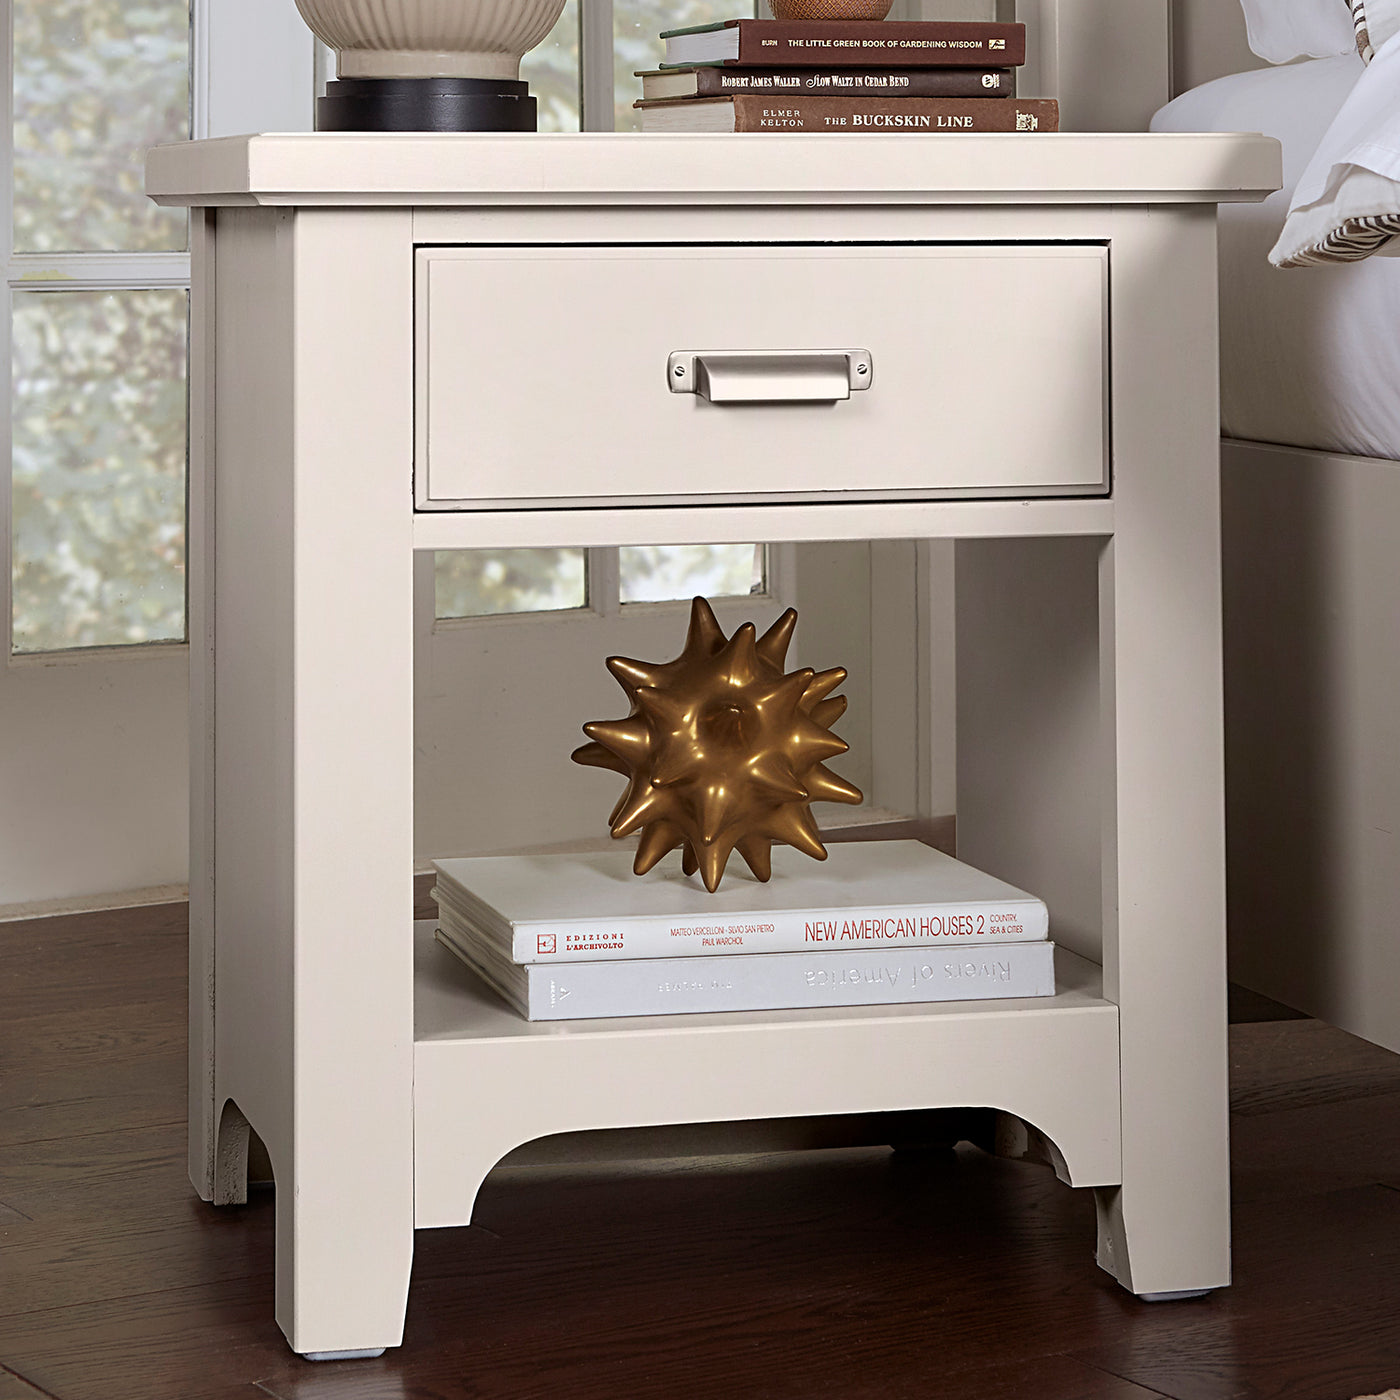 LMCo. Bungalow Collection Night Stand - 1 Drawer